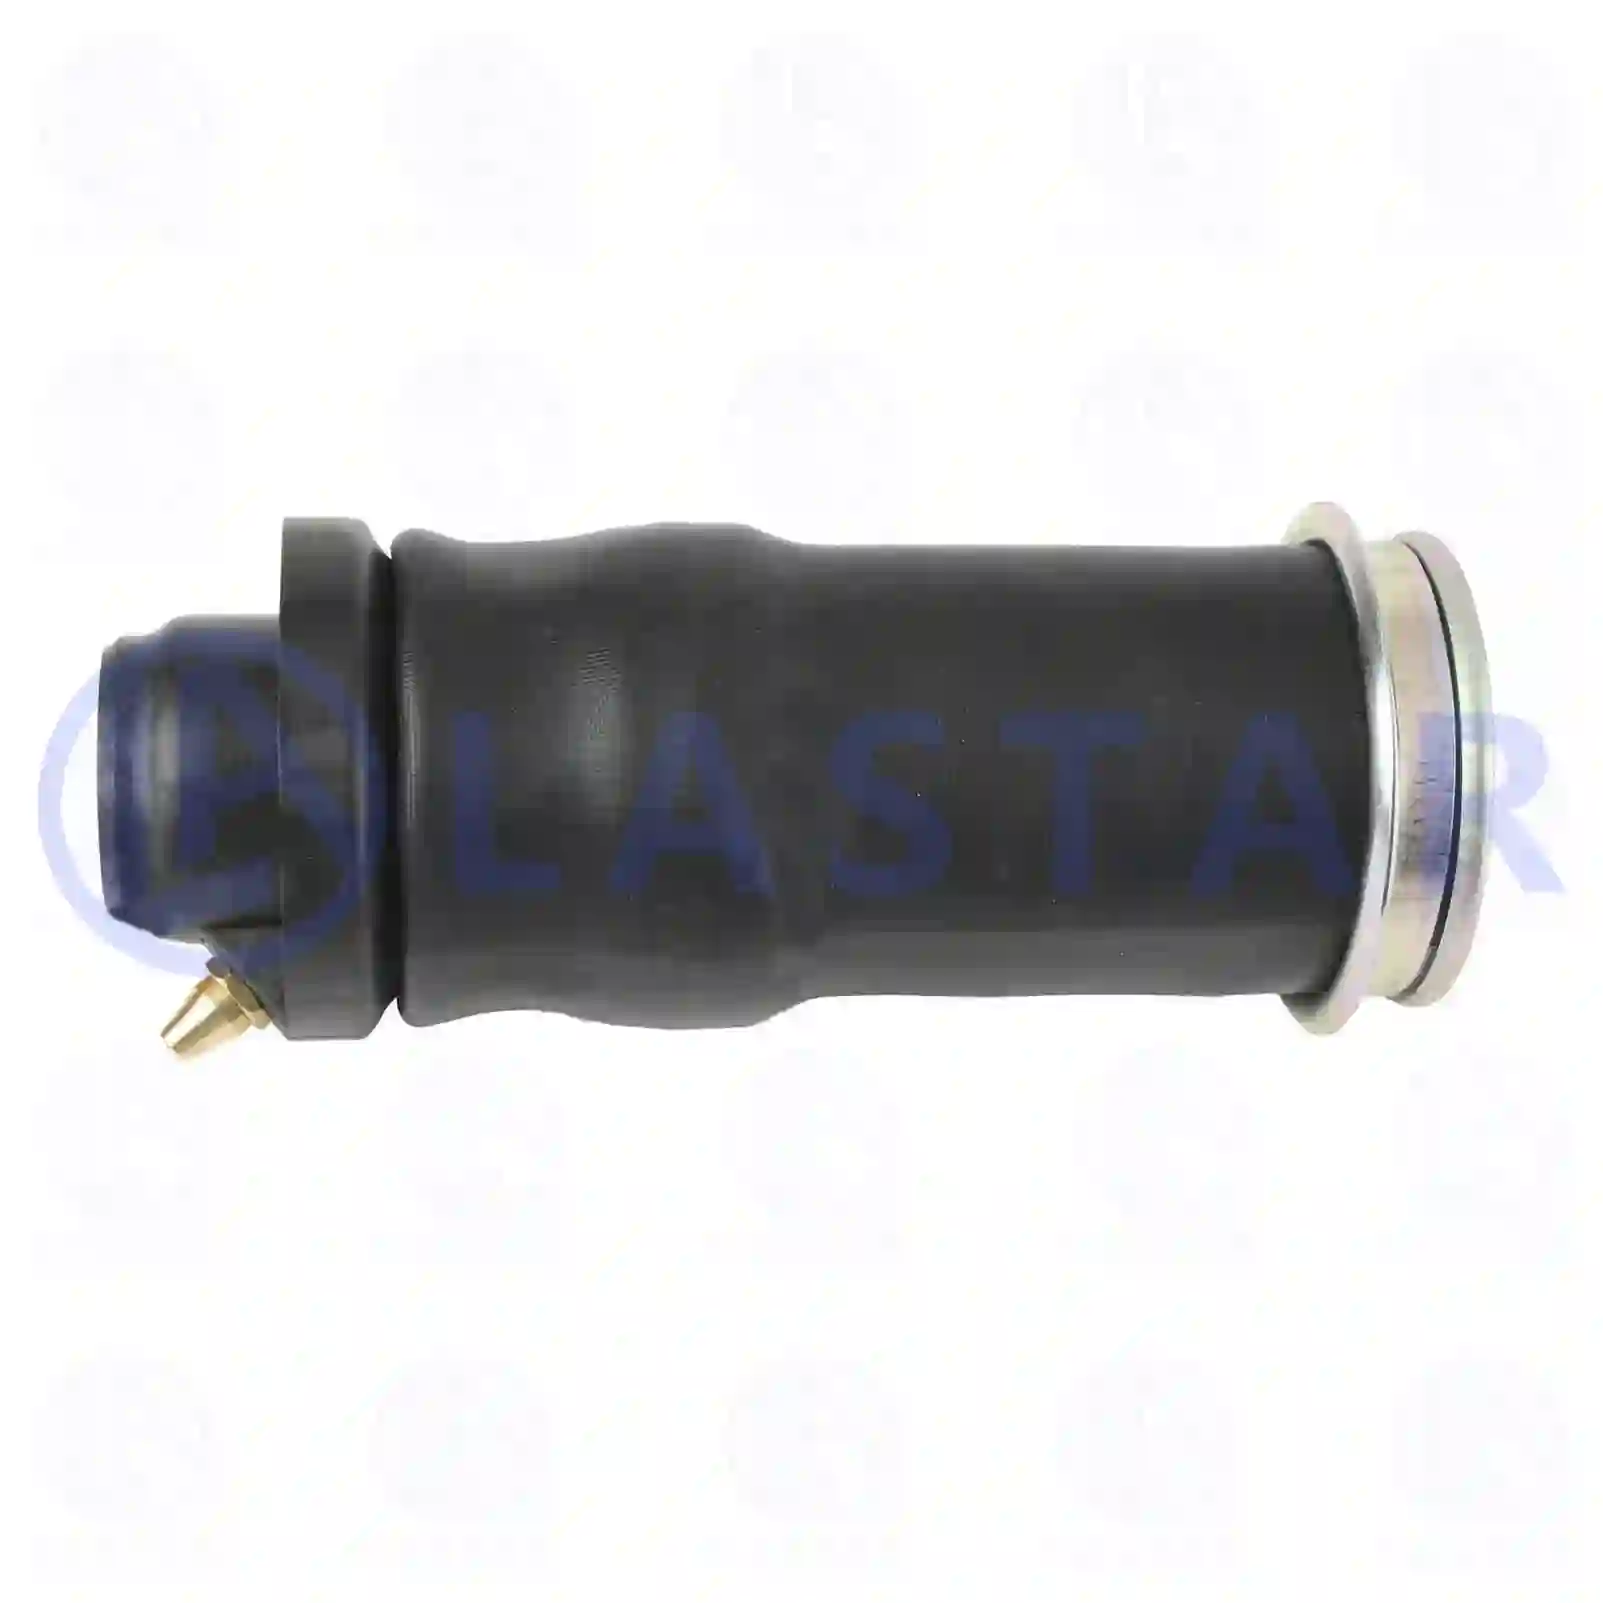 Air bellow, cabin shock absorber, 77735814, 1444016, ZG40693-0008 ||  77735814 Lastar Spare Part | Truck Spare Parts, Auotomotive Spare Parts Air bellow, cabin shock absorber, 77735814, 1444016, ZG40693-0008 ||  77735814 Lastar Spare Part | Truck Spare Parts, Auotomotive Spare Parts